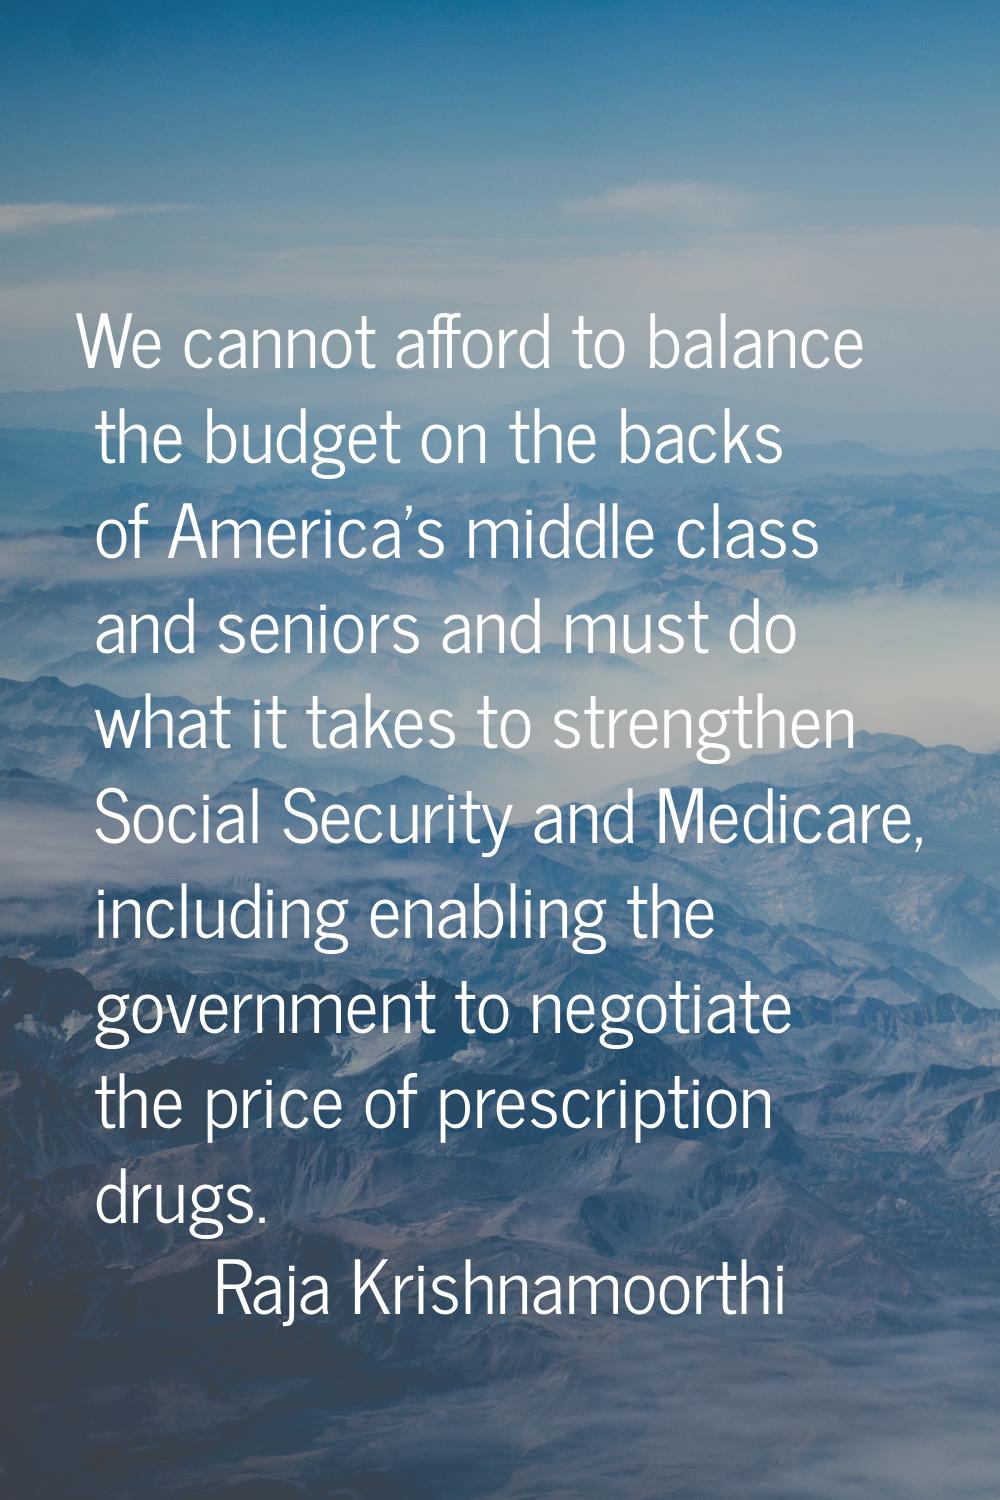 We cannot afford to balance the budget on the backs of America's middle class and seniors and must 